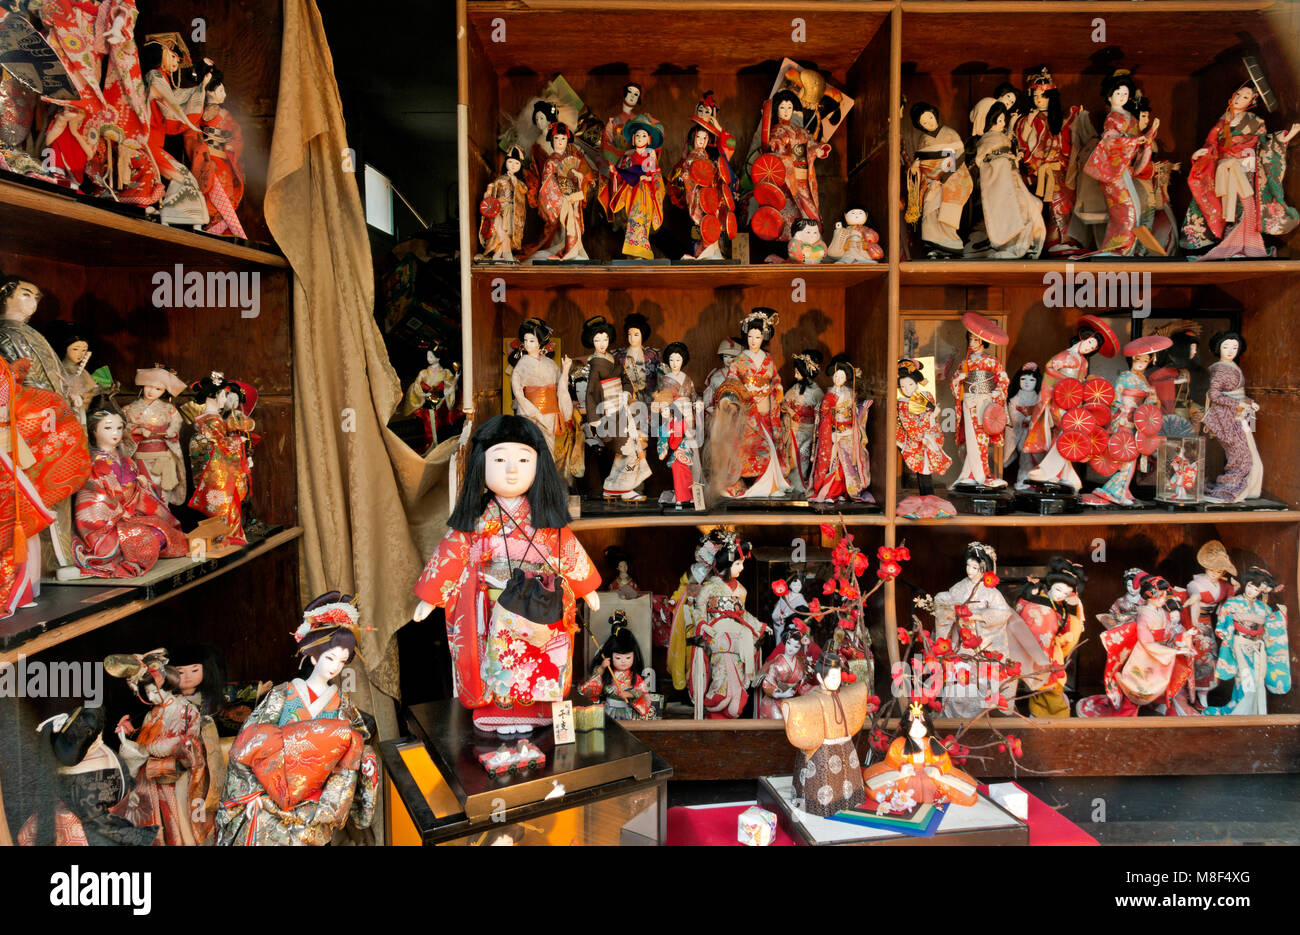 WA13888-00...WASHINGTON - View of part of the display of Japanese dolls found in the window of the Panama Hotel in Seattle's International District. 2 Stock Photo